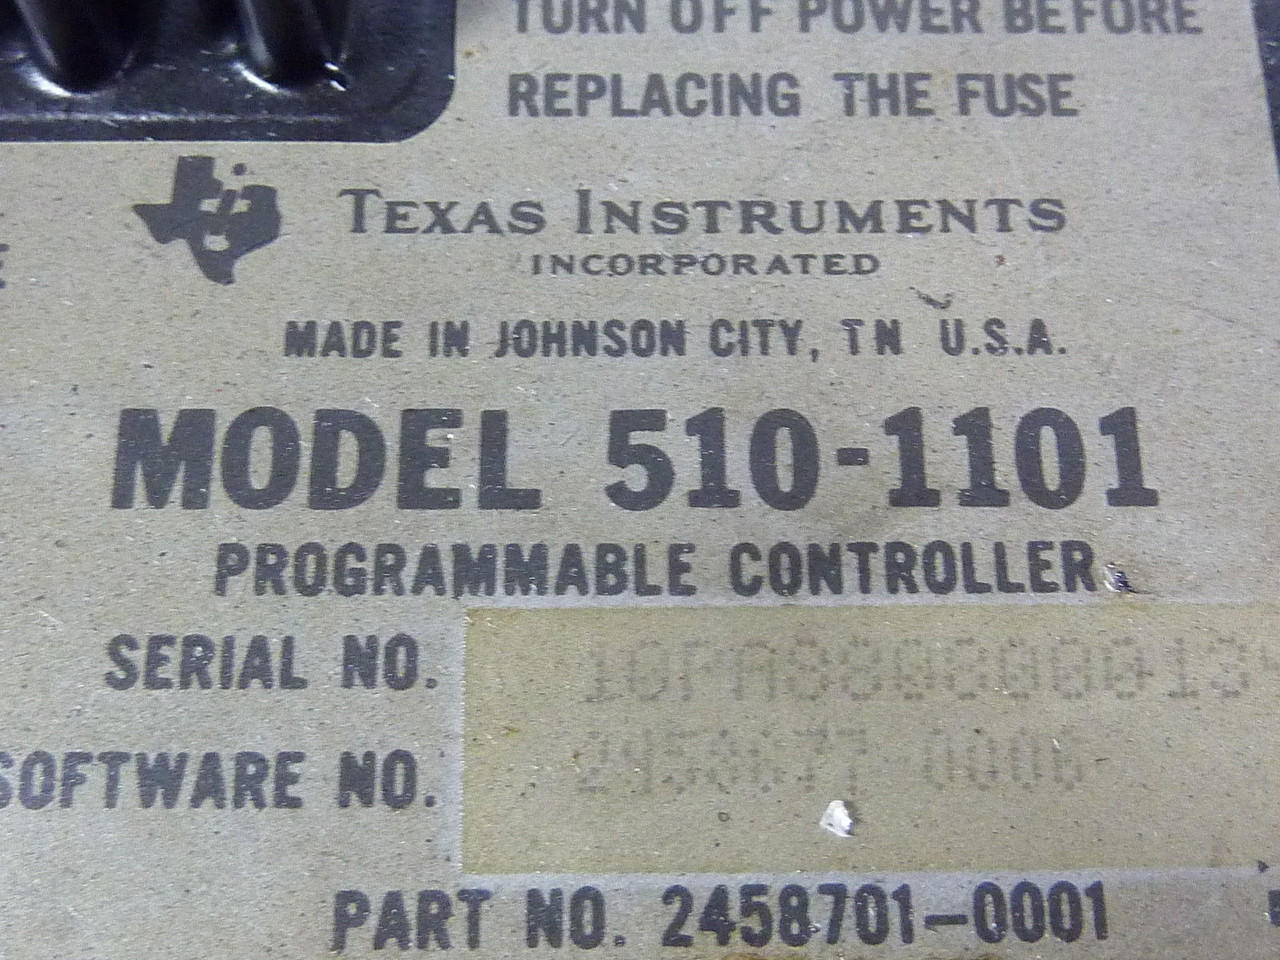 Texas Instruments 510-1101 Controller 1/2A 25W 85/132V USED